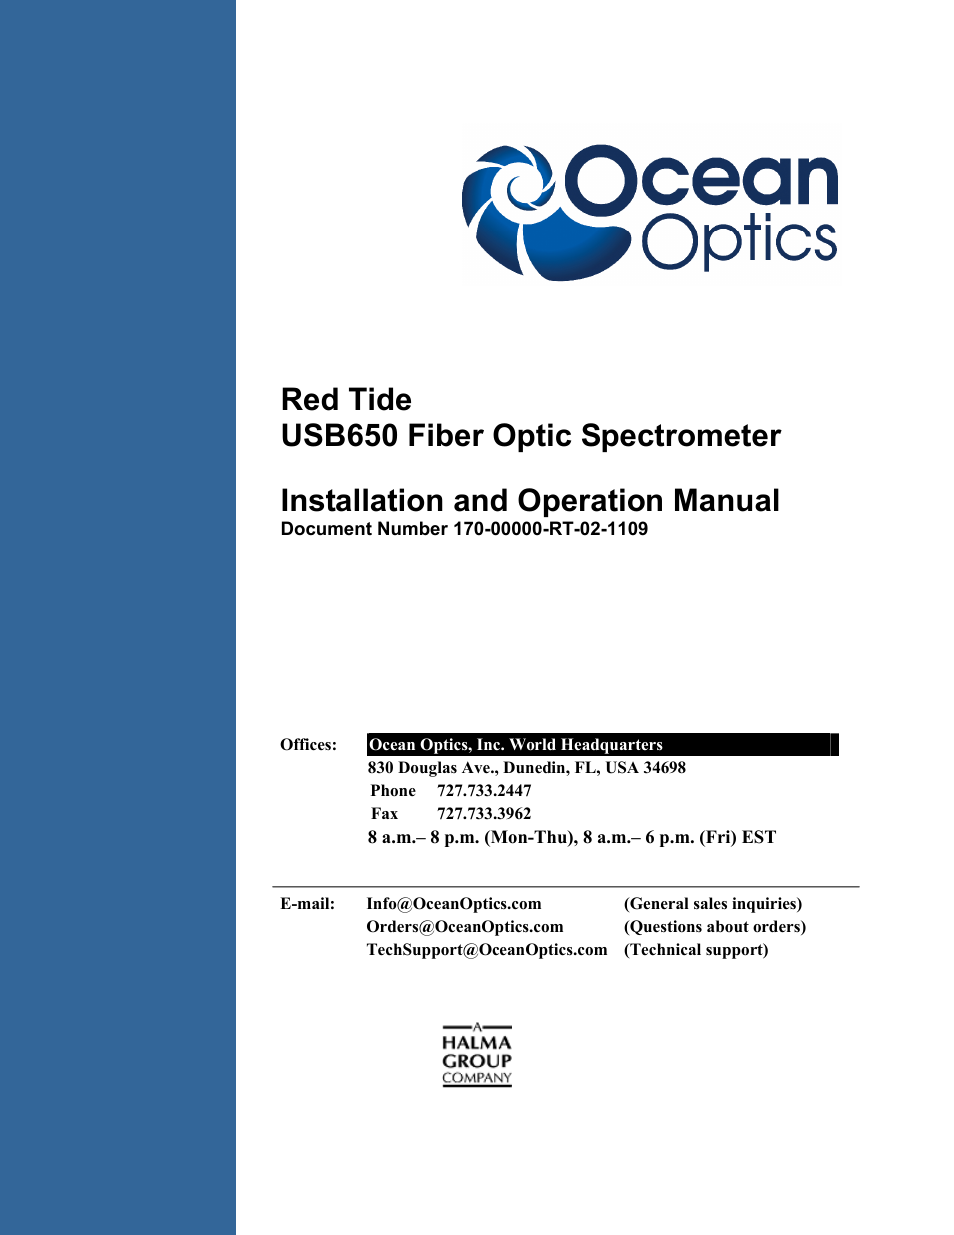 Optics Red Tide USB650 Install 26 pages